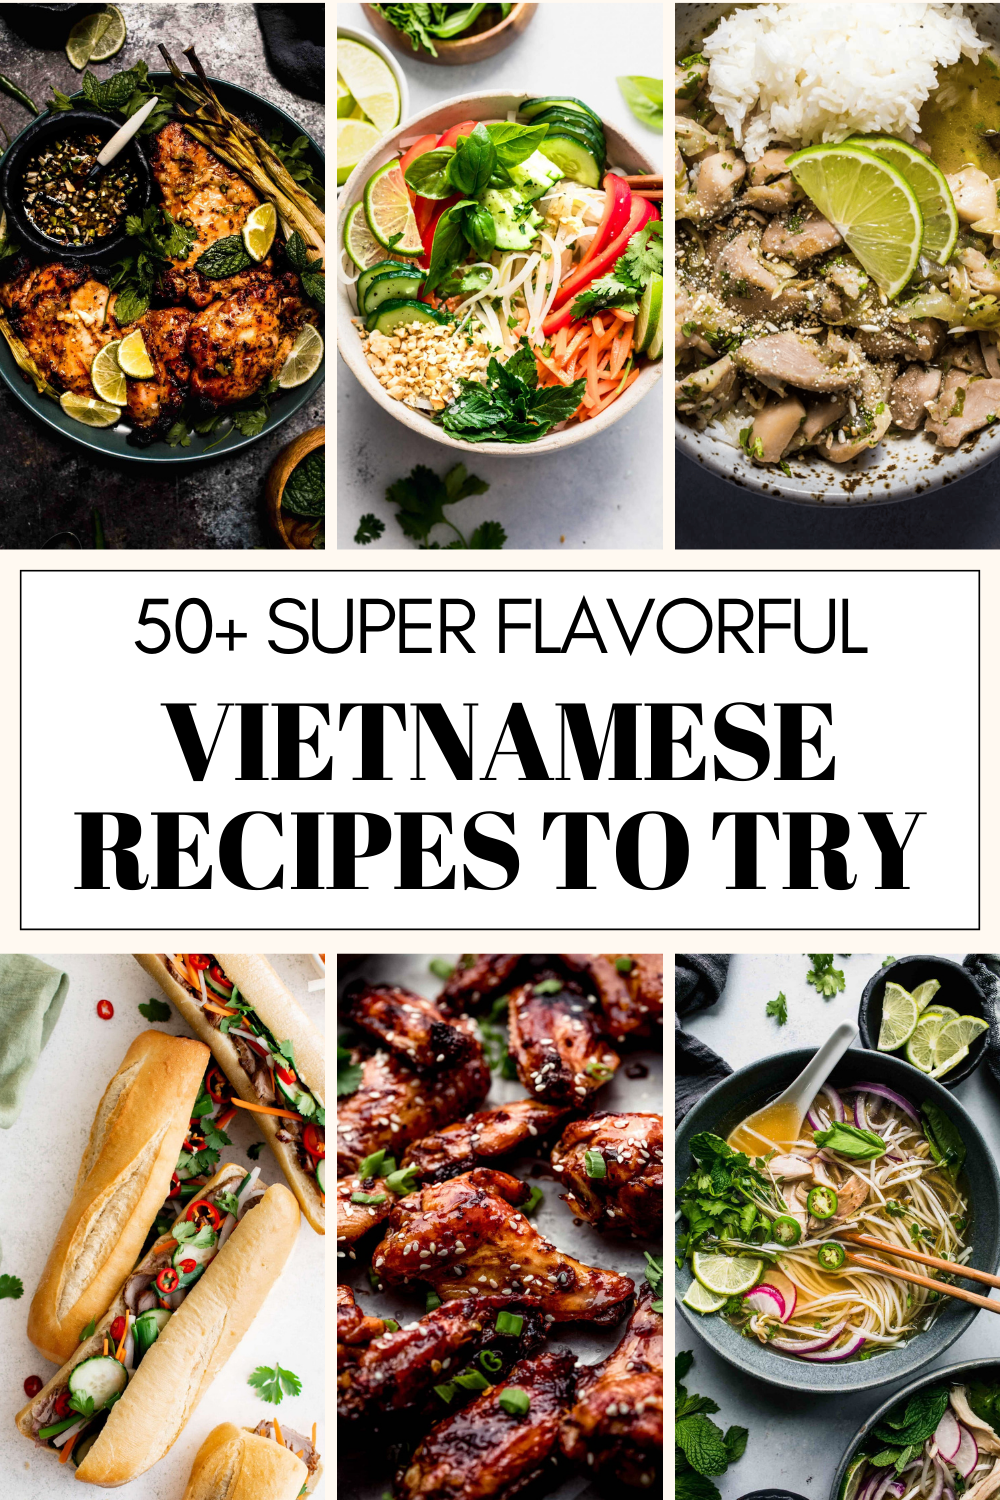 Collage of Vietnamese recipes with text overlay.